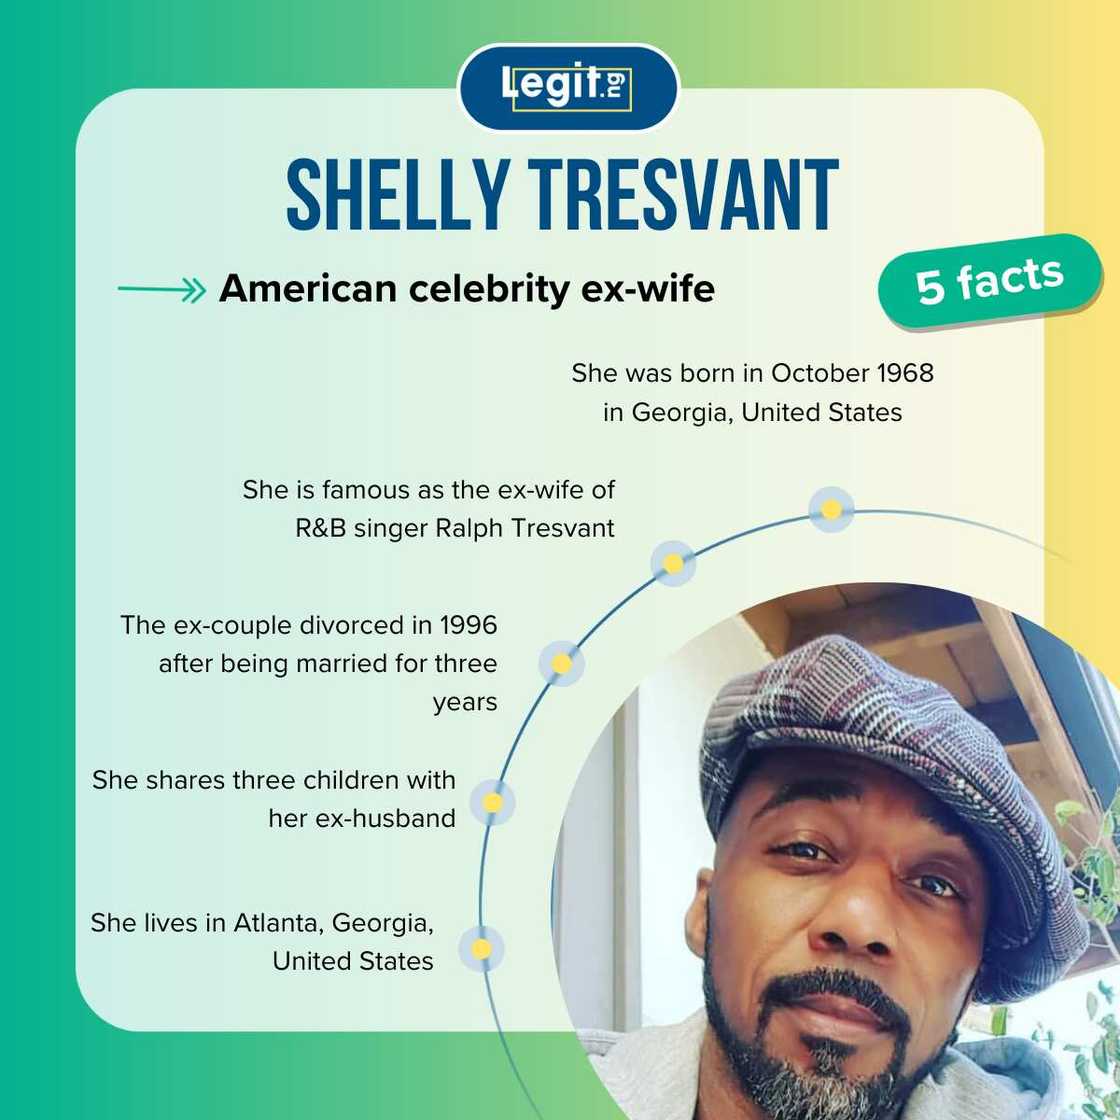 Five facts about Shelly Tresvant